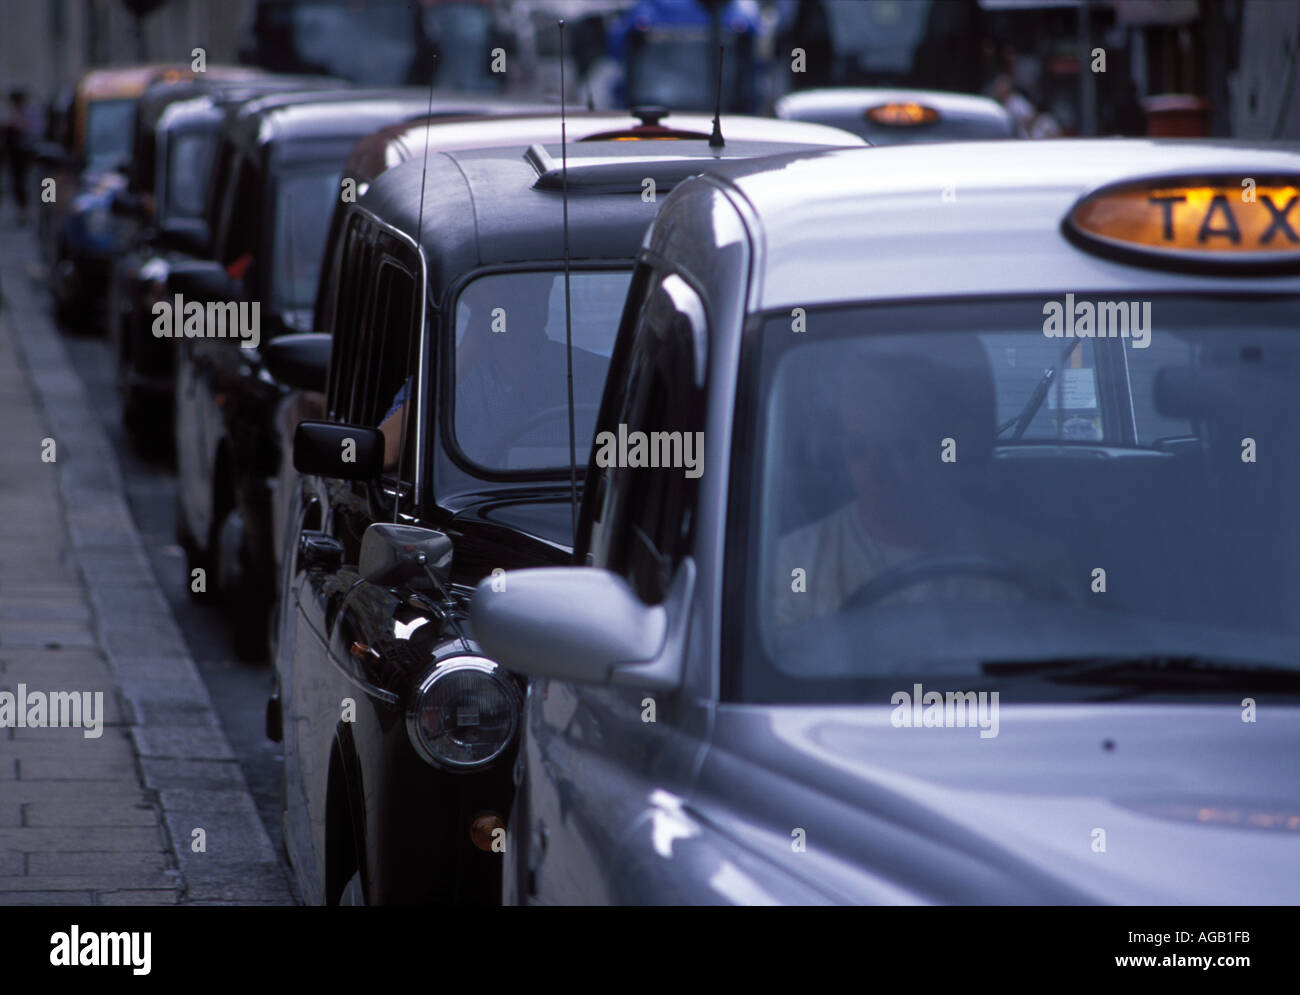 Taxi cabs line up outside Liverpool Street station in London Stock Photo